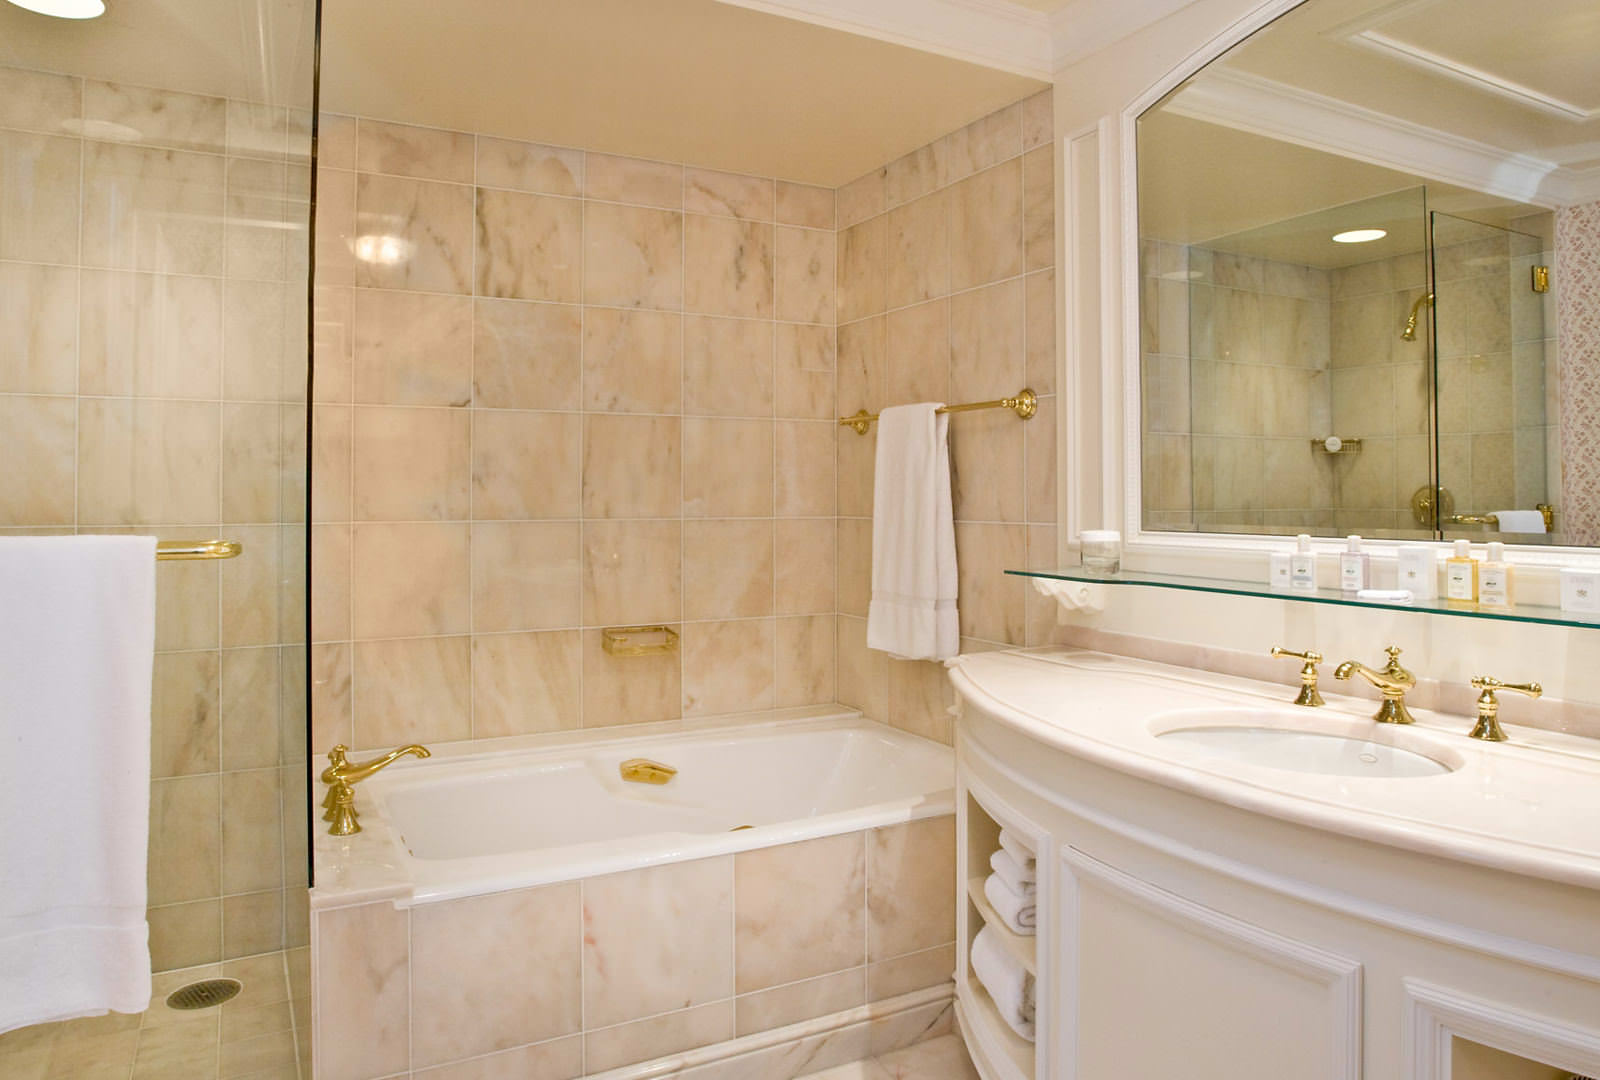 Grand America Hotel Italian marble bathroom with separate shower and soaking tub